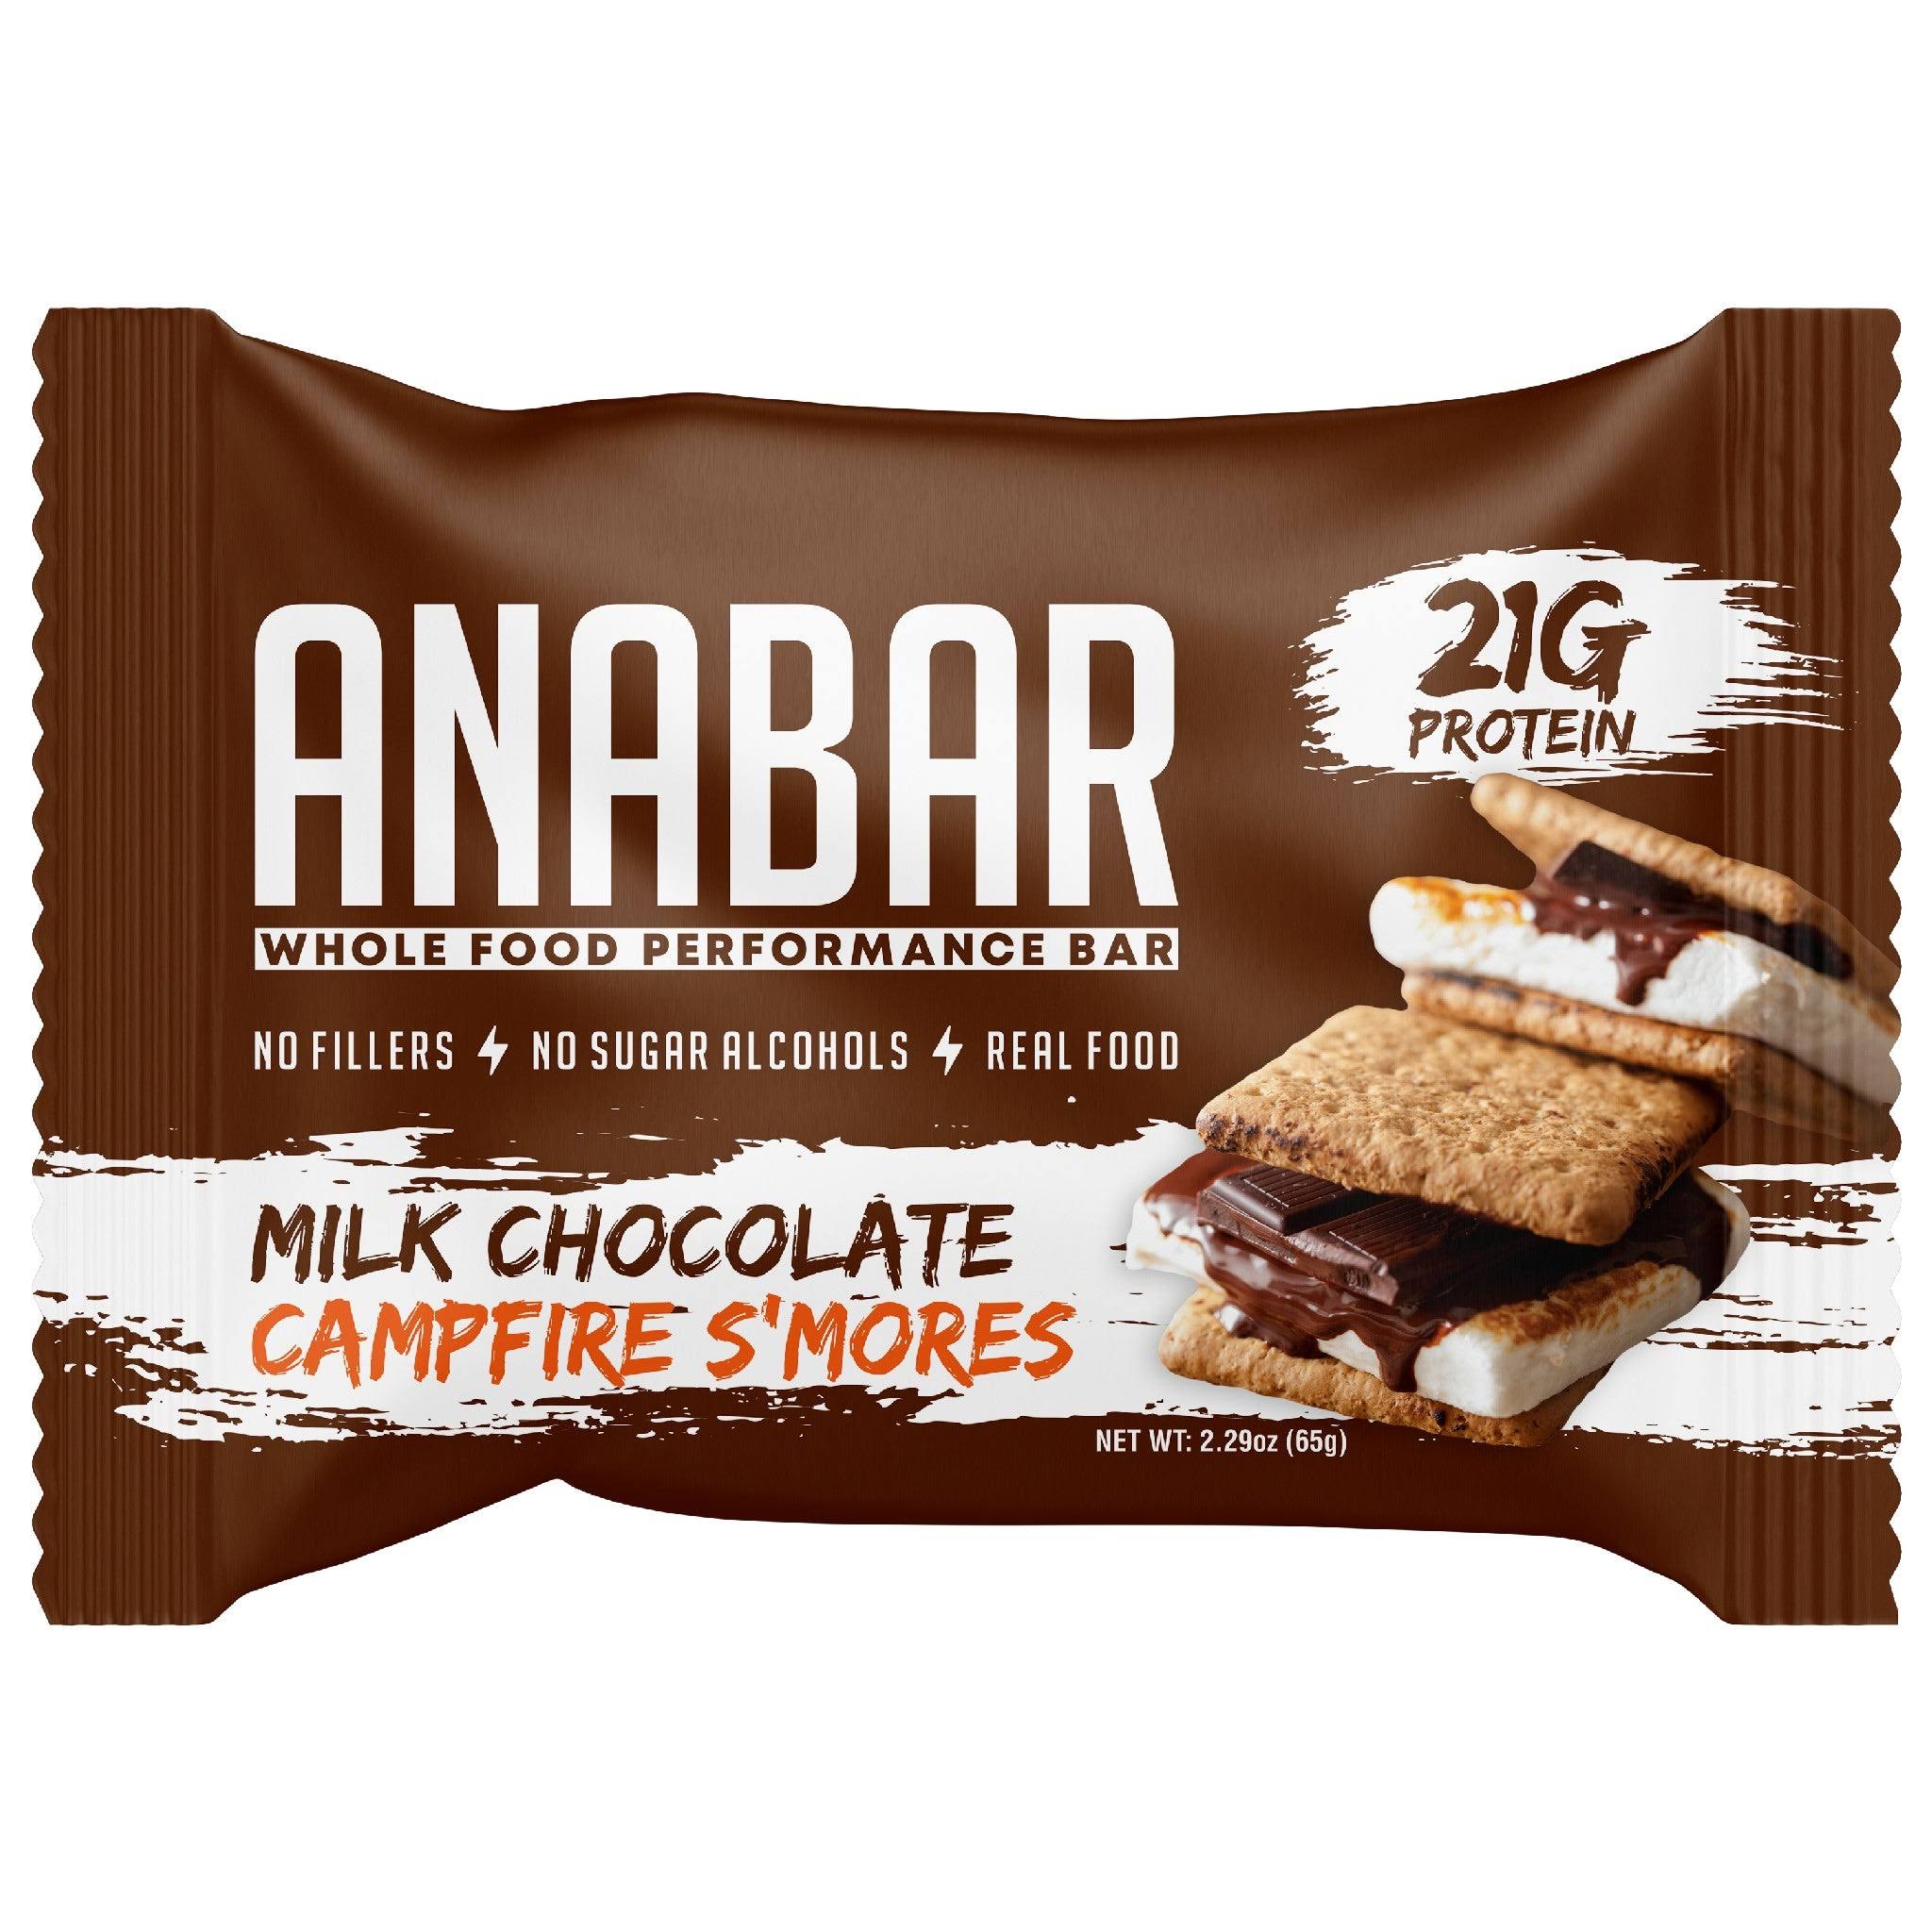 Anabar Whole Food Performance Bar - White Chocolate Fruity Cereal Crunch